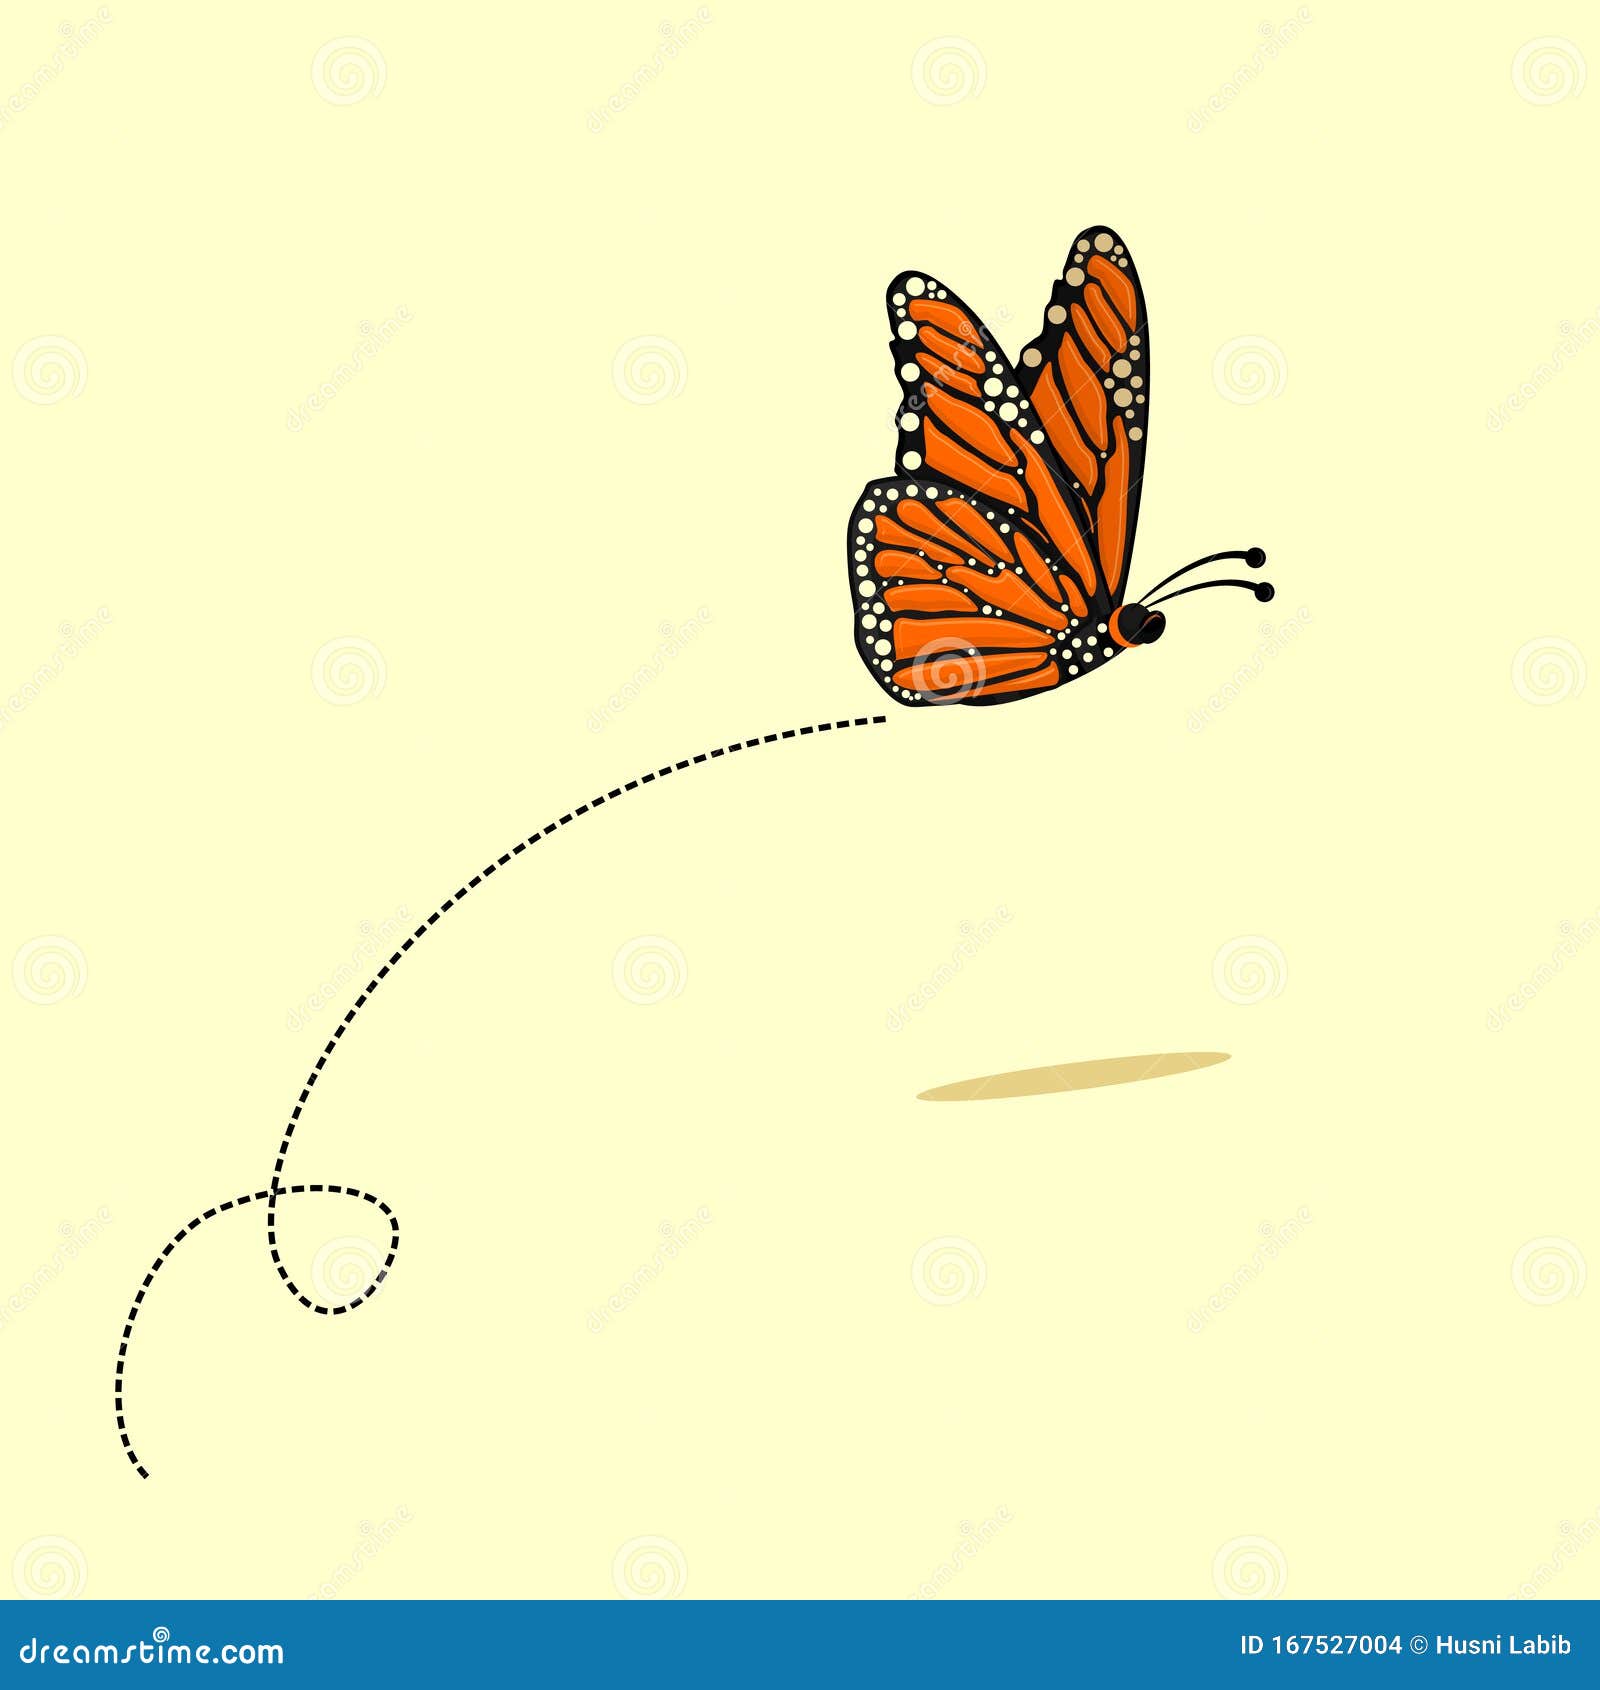 Flying Butterfly Vector Cartoon Stock Vector - Illustration of butterflies,  icon: 167527004